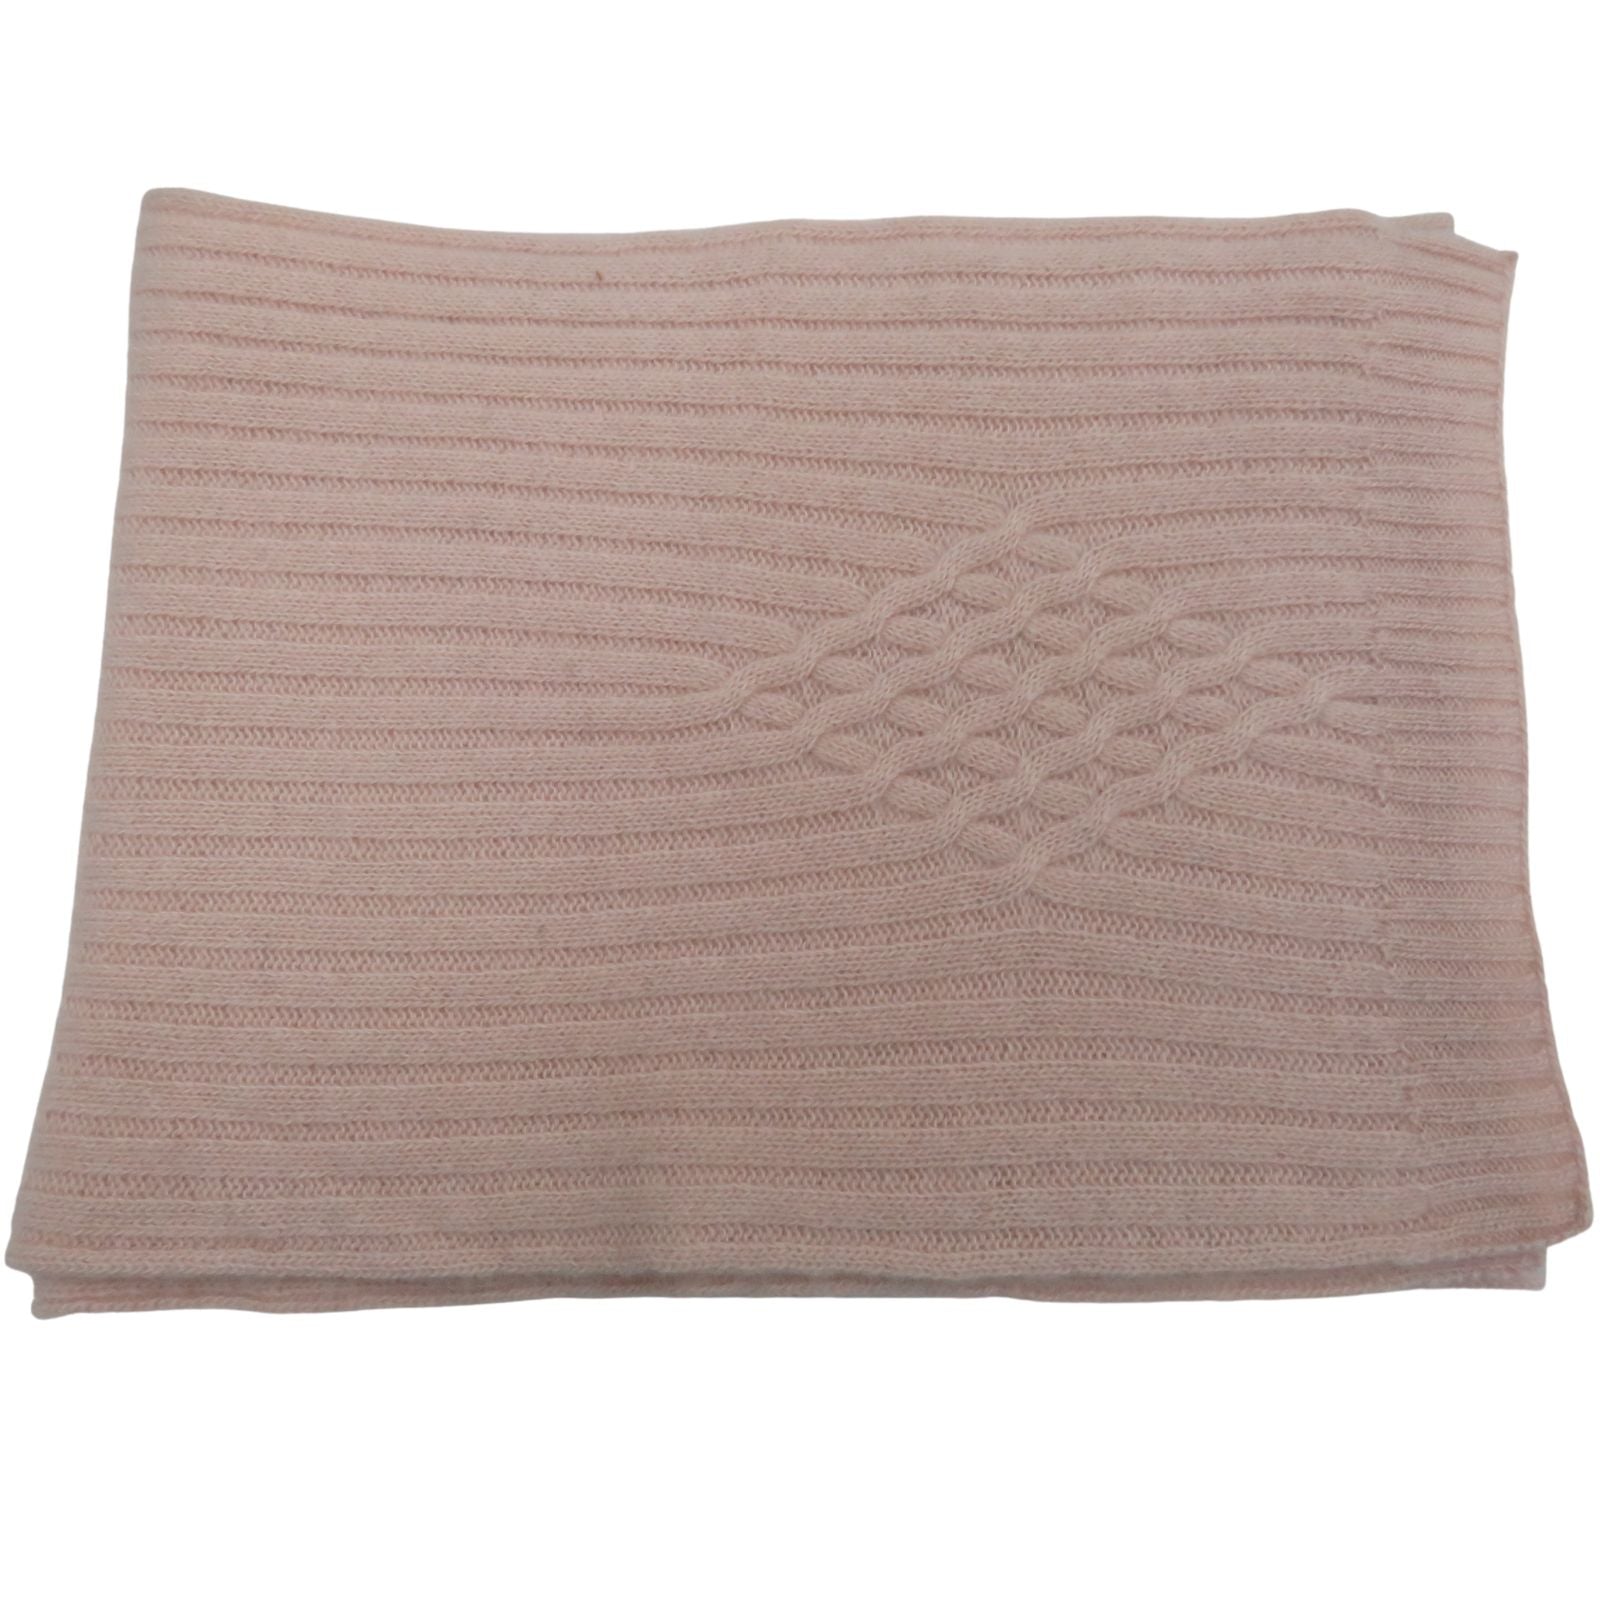 Cashmere Scarf 10x60" Ribbed with Diagonal Design Soft Pink